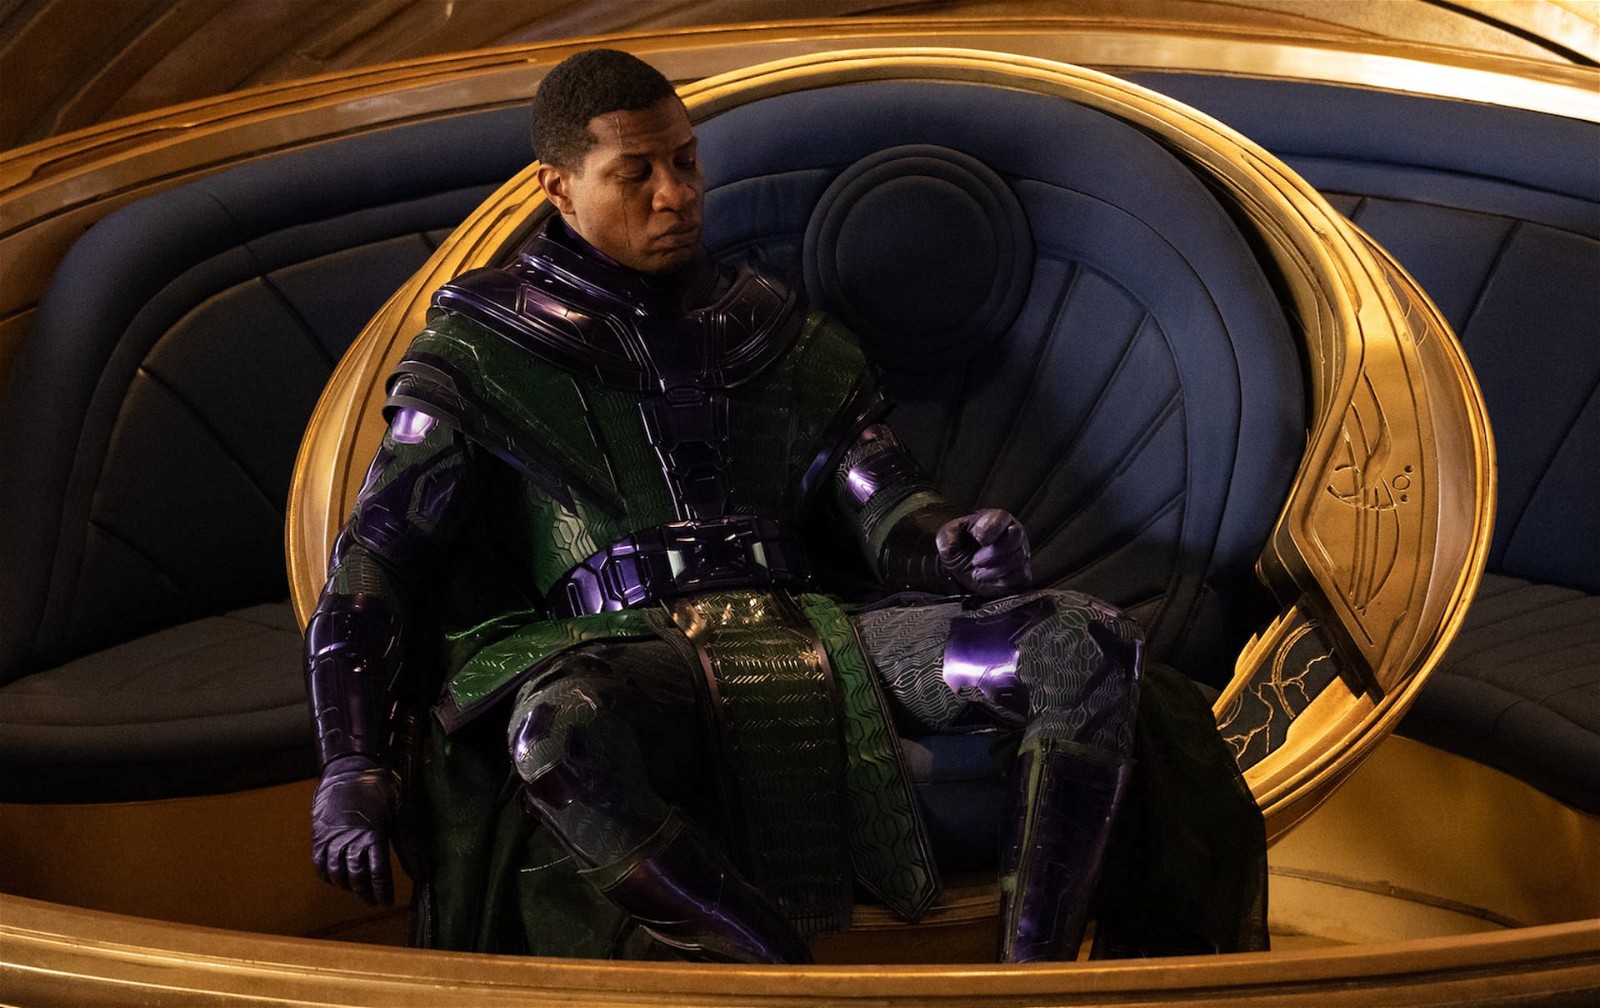 Jonathan Majors' as Kang The Conquerer in Ant-Man and The Wasp: Quantumania